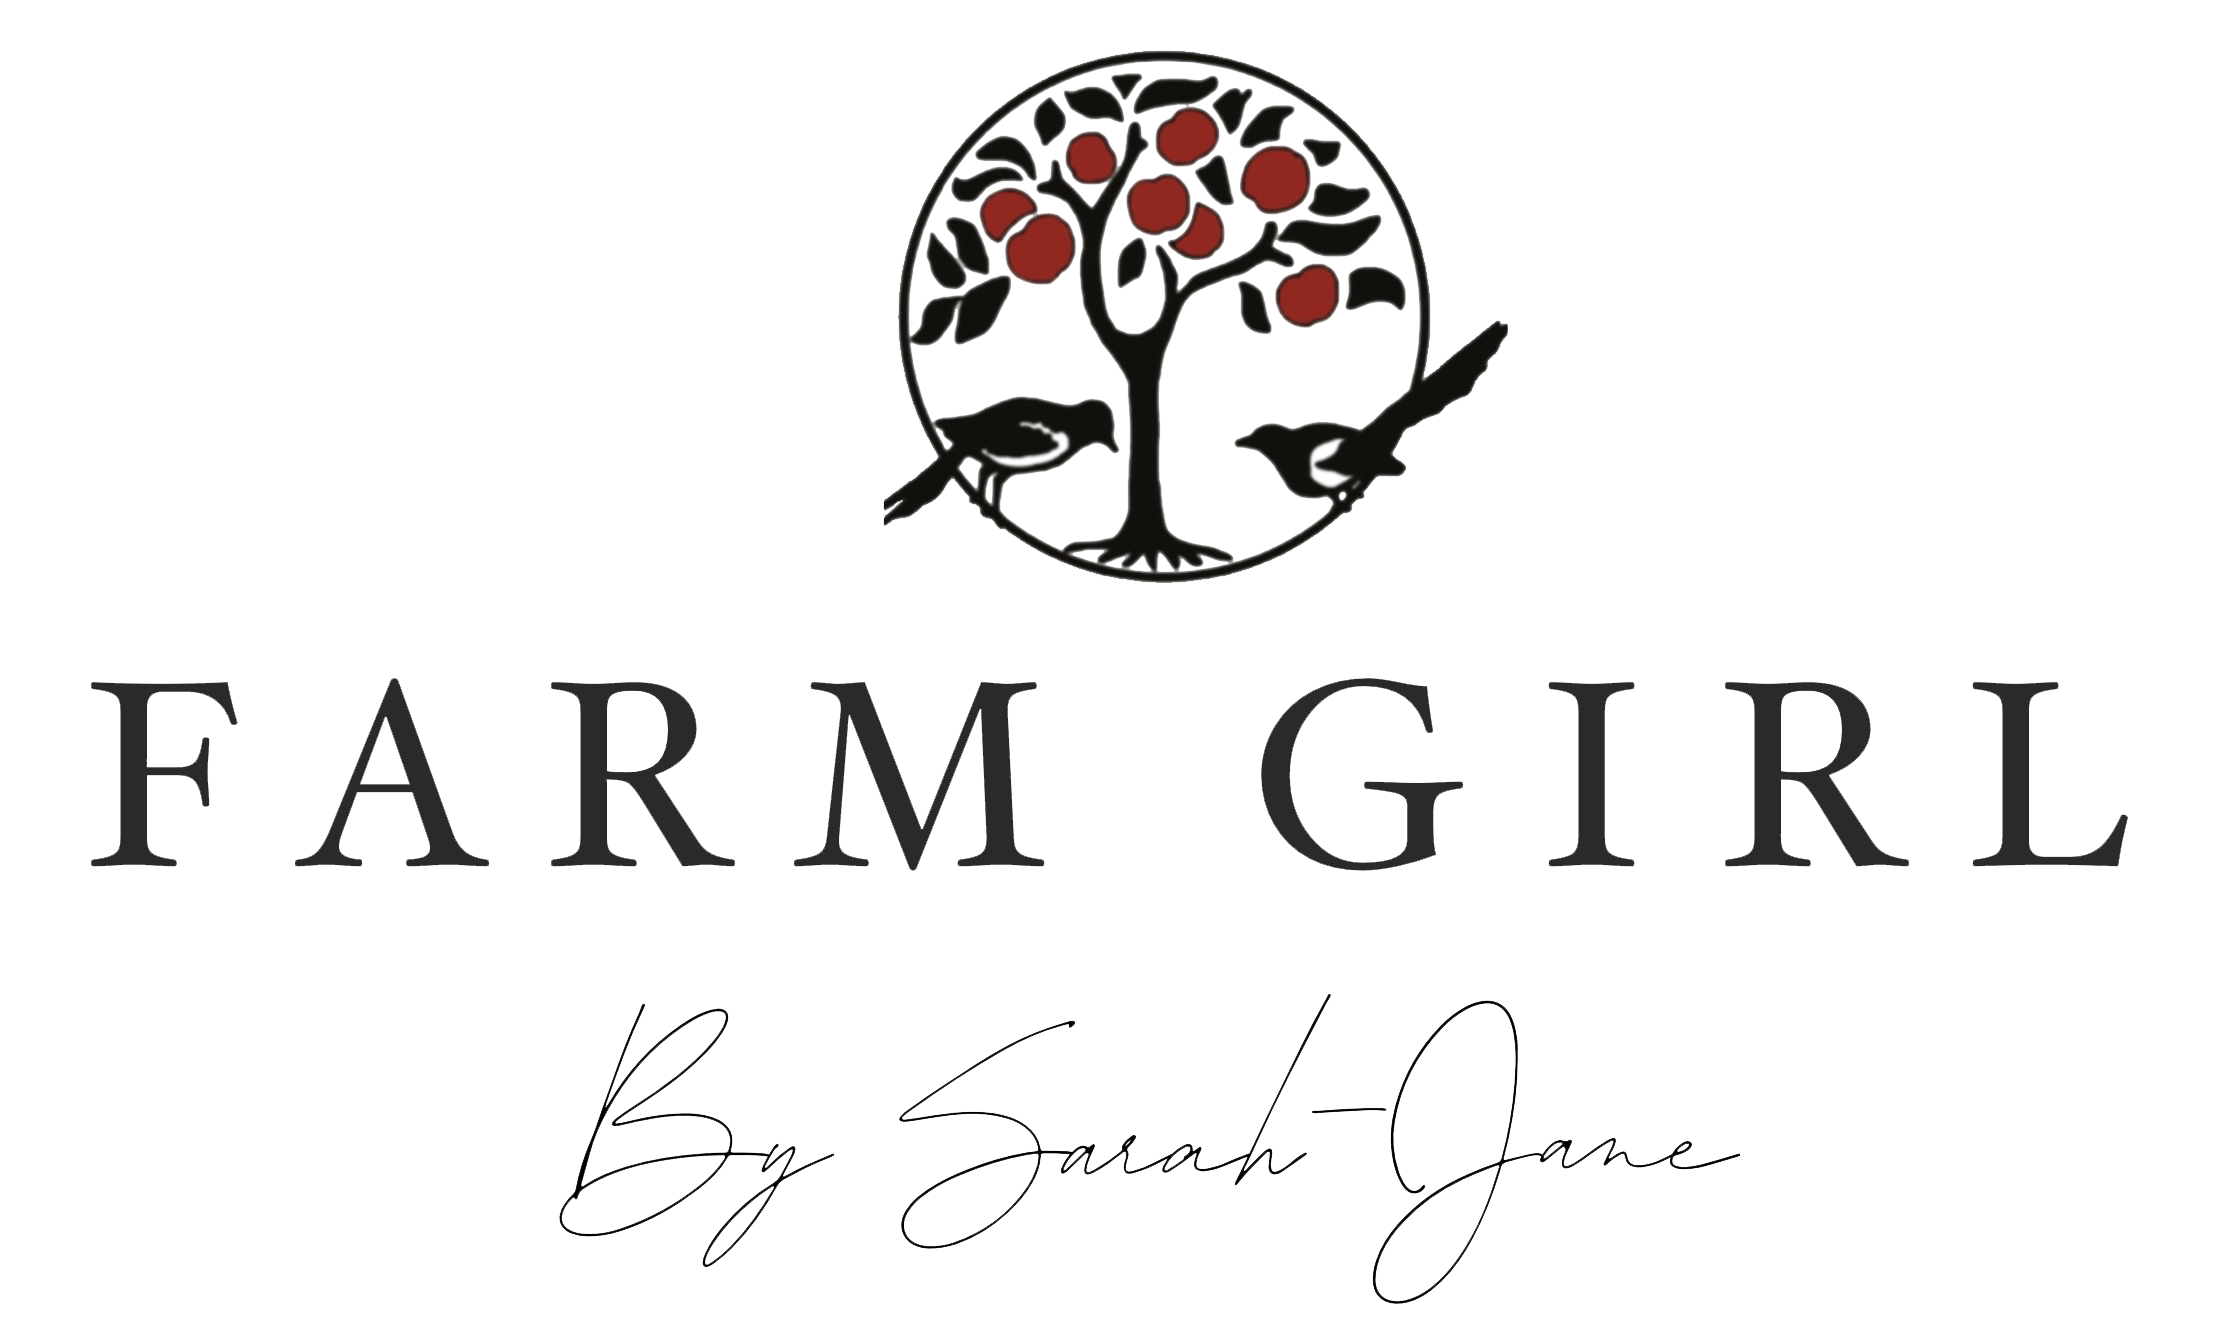 Sparkle Farms - At Sparkle Farms we're all about moms and girl